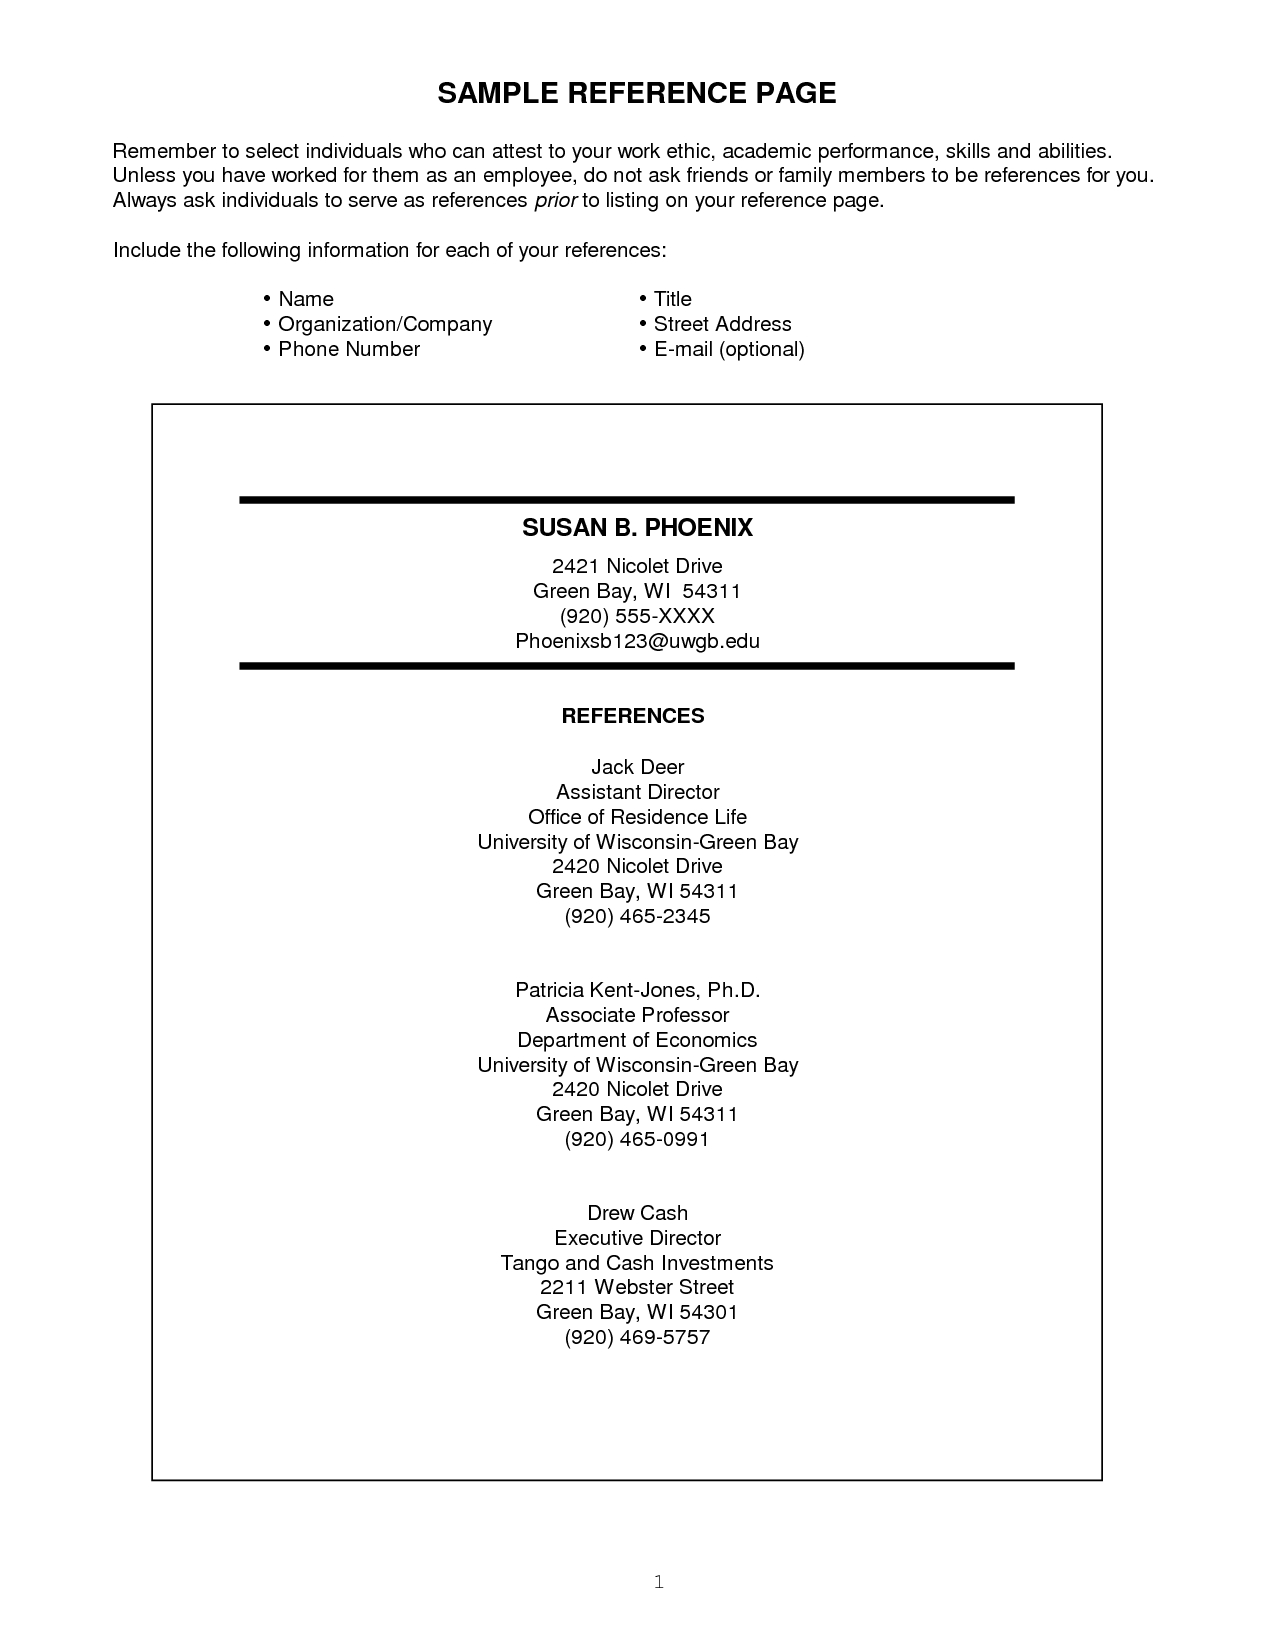 Reference Letter Template for A Friend - Reference Sample for Resume Resume Reference Page